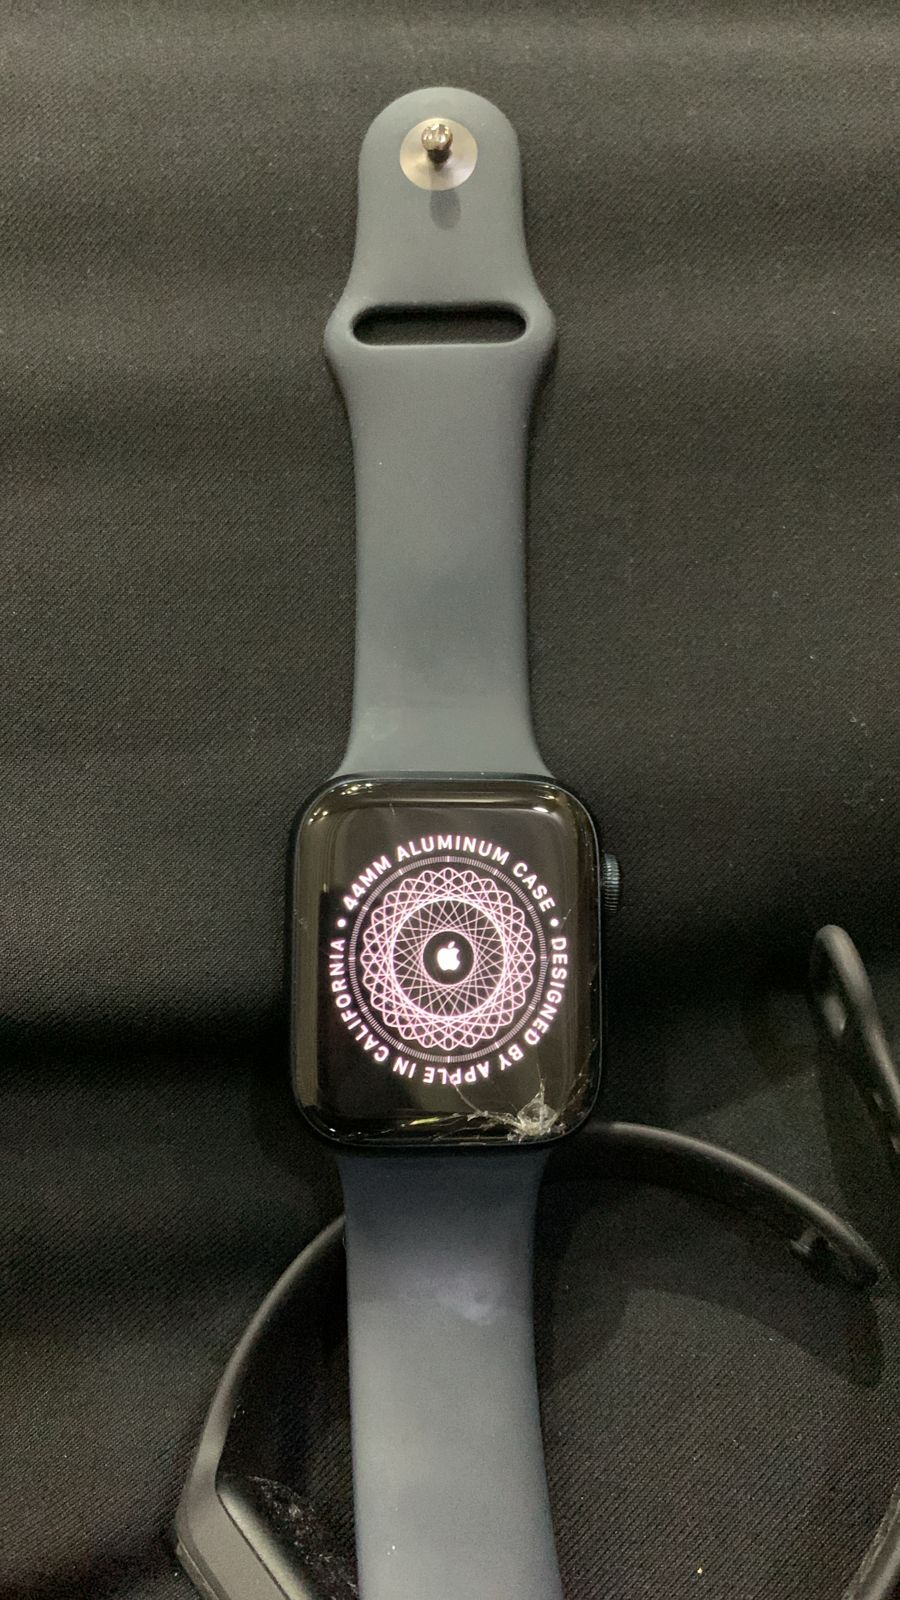 me apple watch not connect with iphone !! - Apple Community